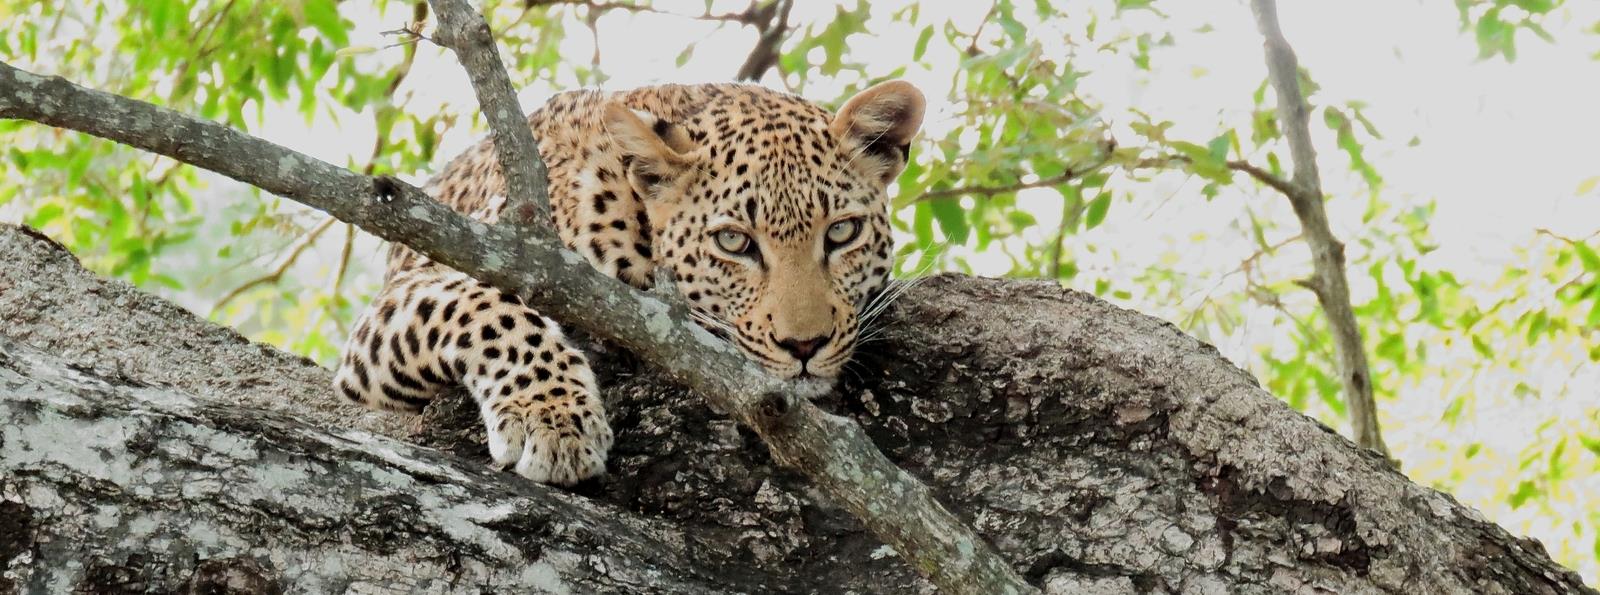 Top 10 Greater Kruger Safari Lodges For Families